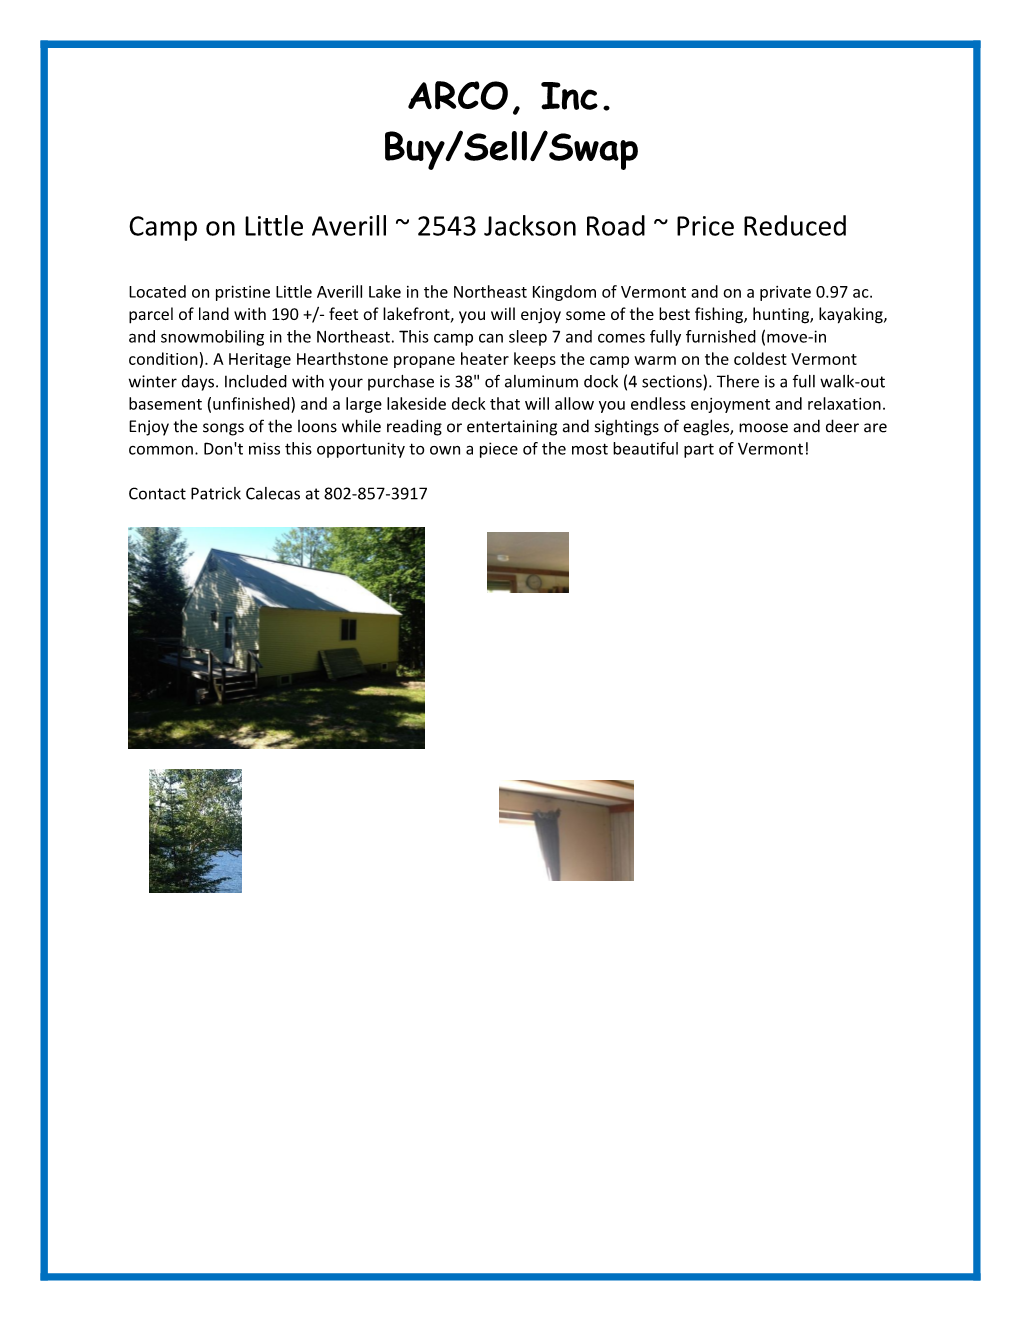 Camp on Little Averill 2543 Jackson Road Price Reduced